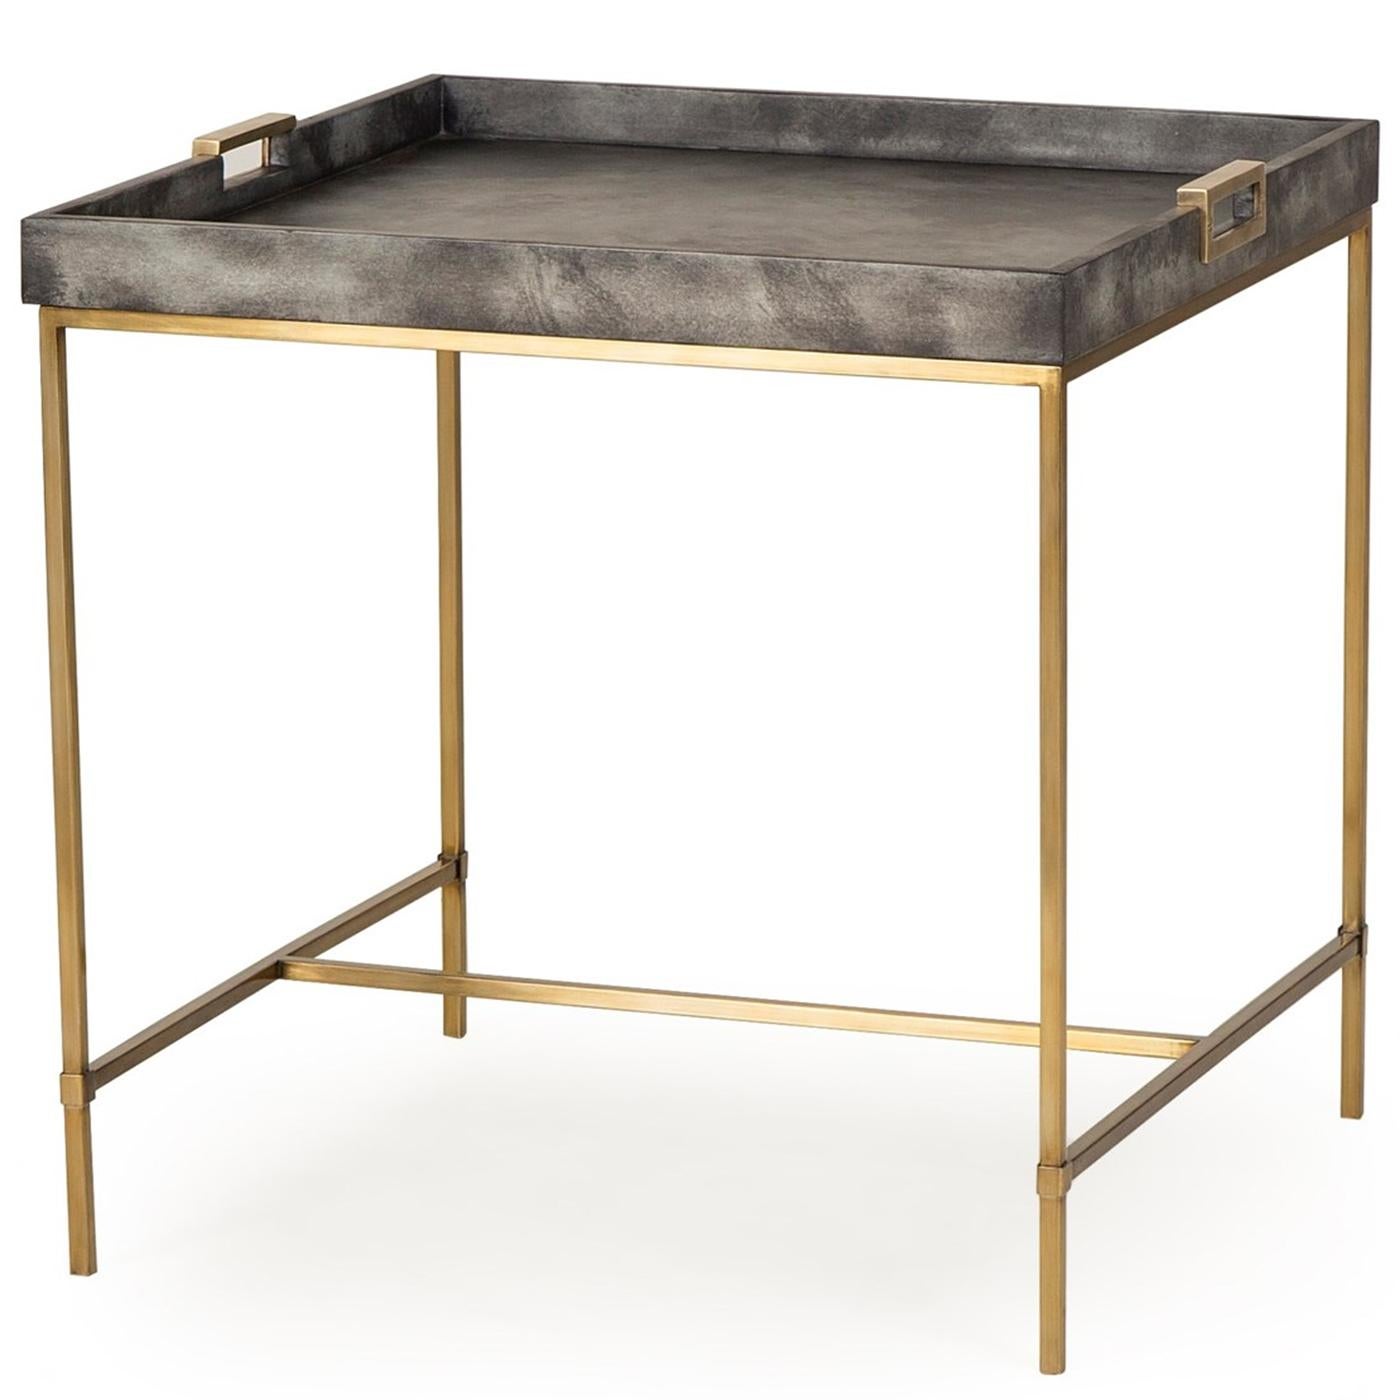 English Charcoal Grey Side Table with Brass Finish